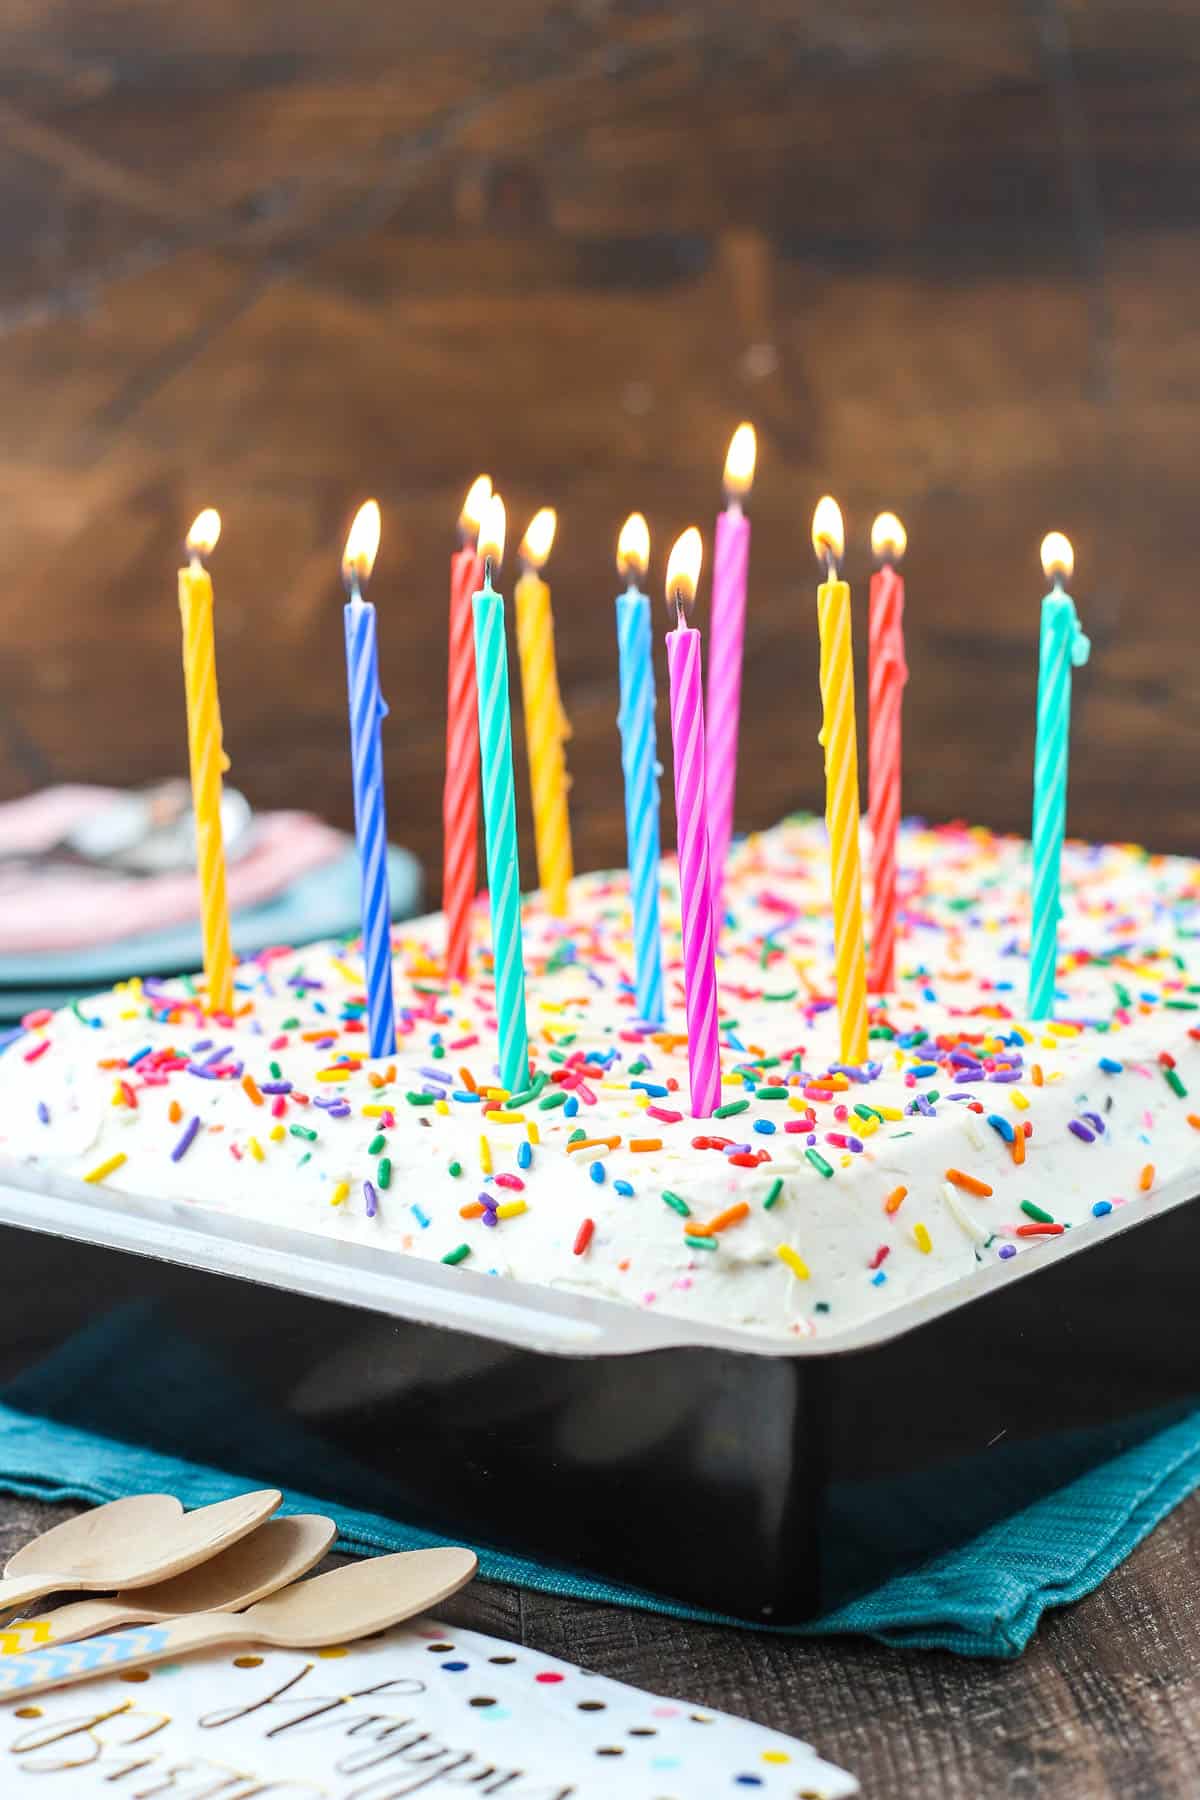 the full cake with colorful candles on top that are lit